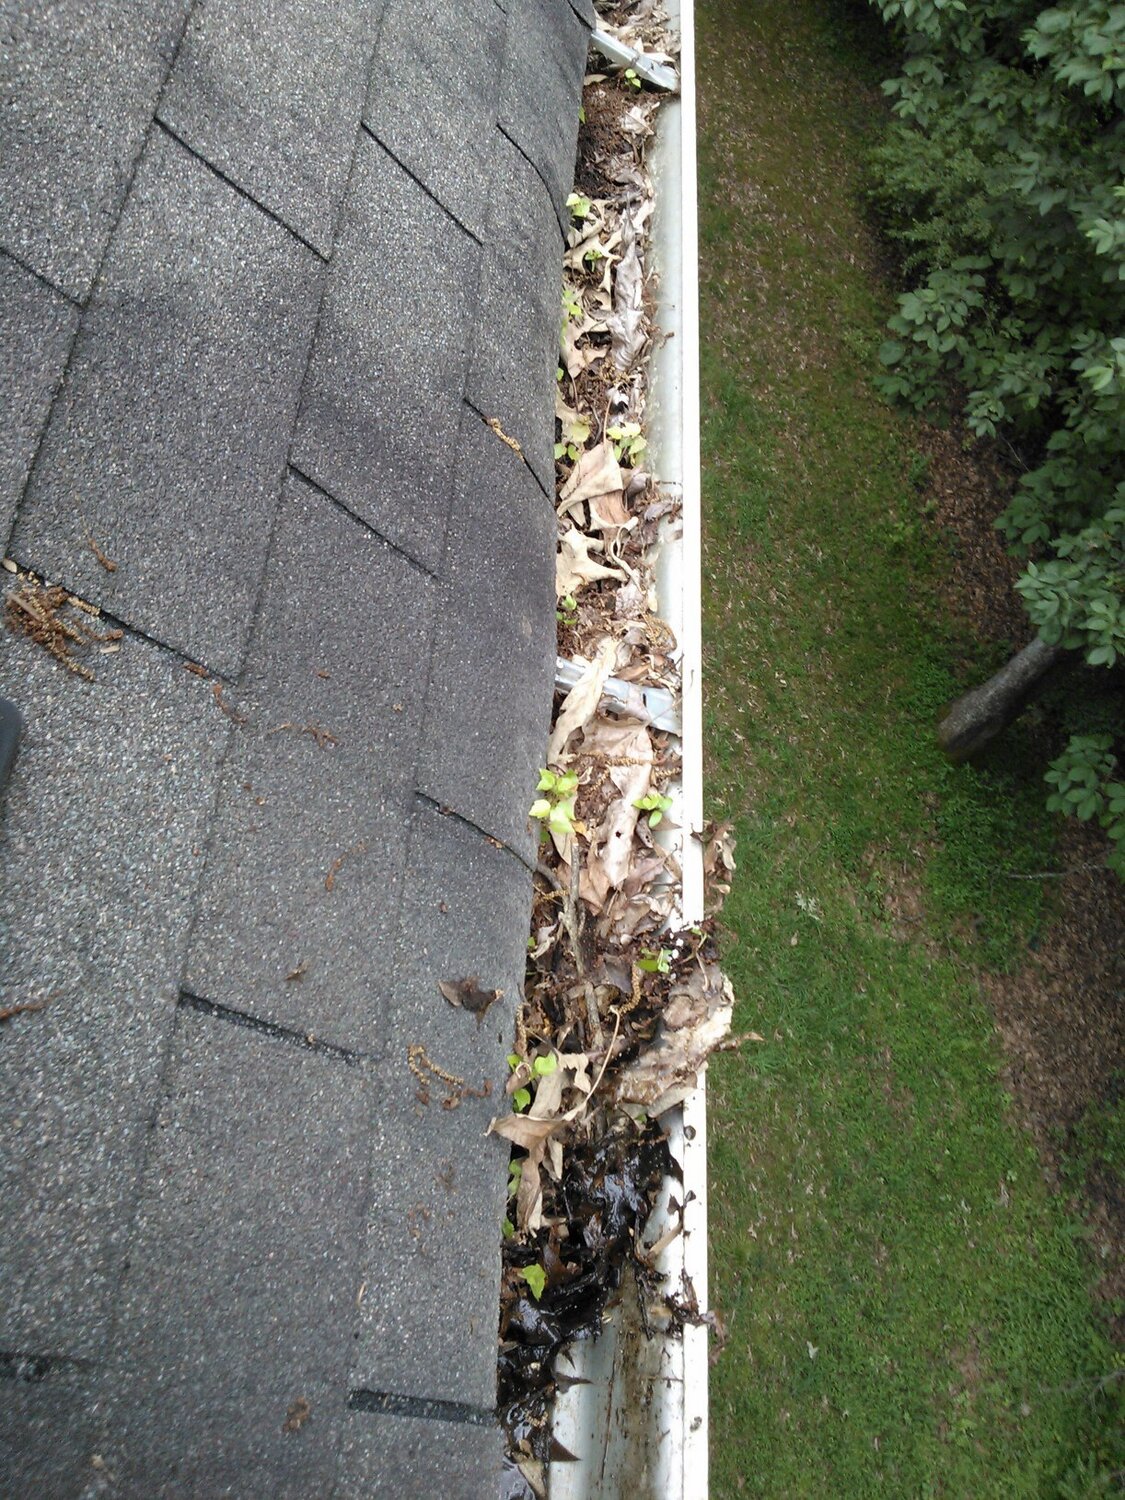 Don’t let leaves pile up in your gutters. ..File link: creativecommons.org/licenses/by-sa/3.0